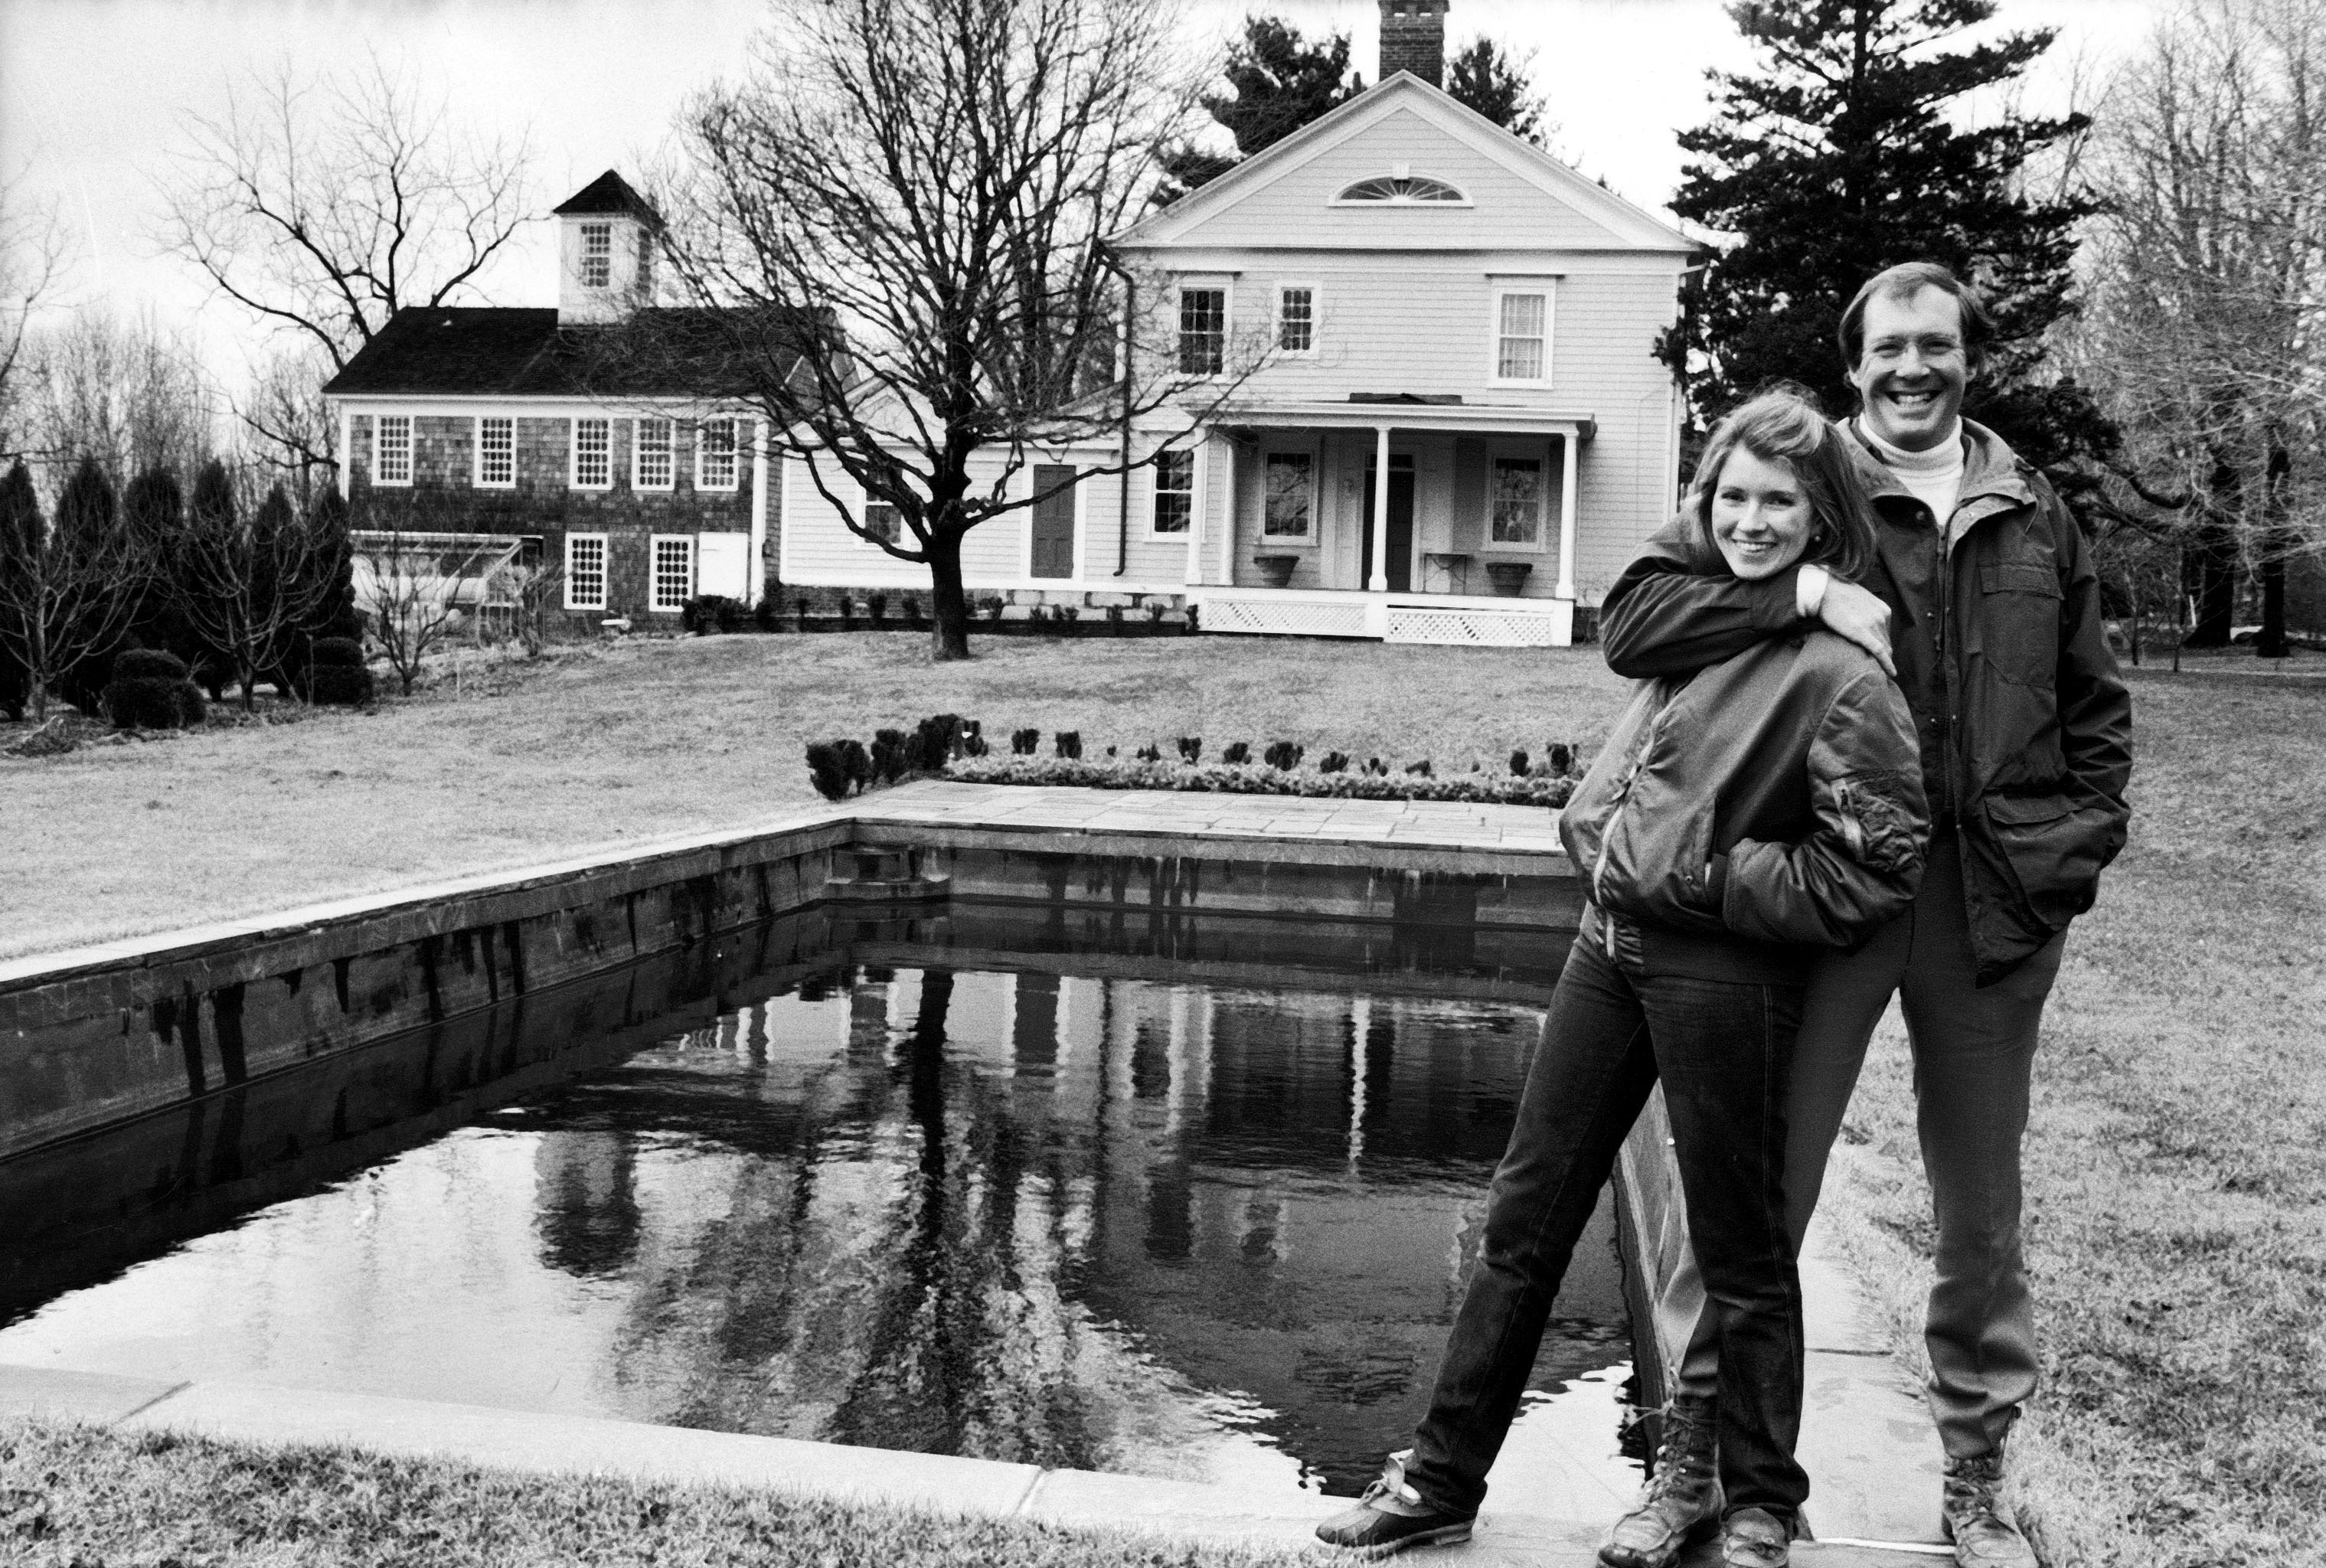 Martha and Andy Stewart outside their home on March 24, 1980 | Source: Getty Images